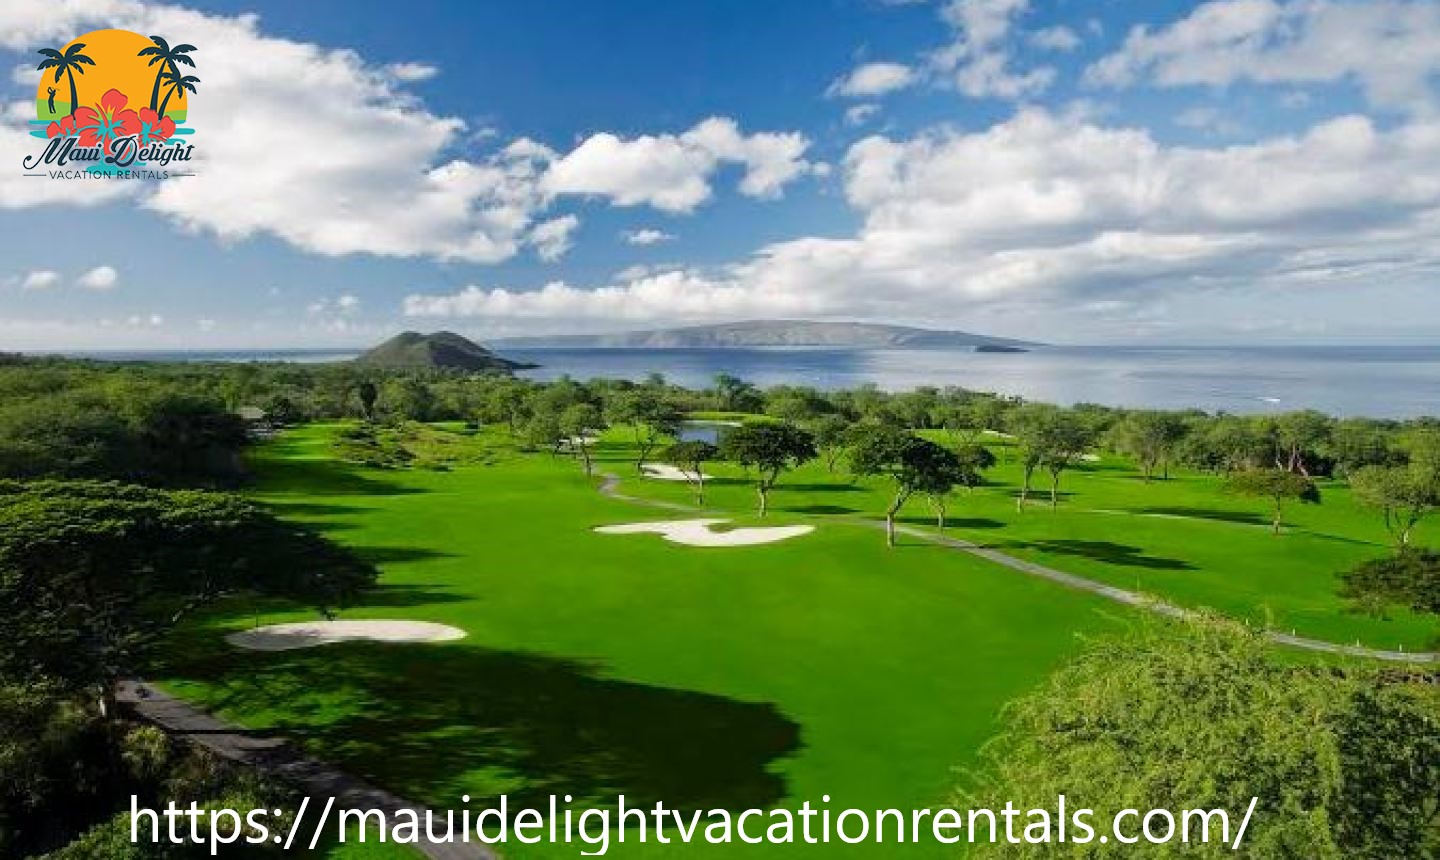 Golf in Maui on a Budget